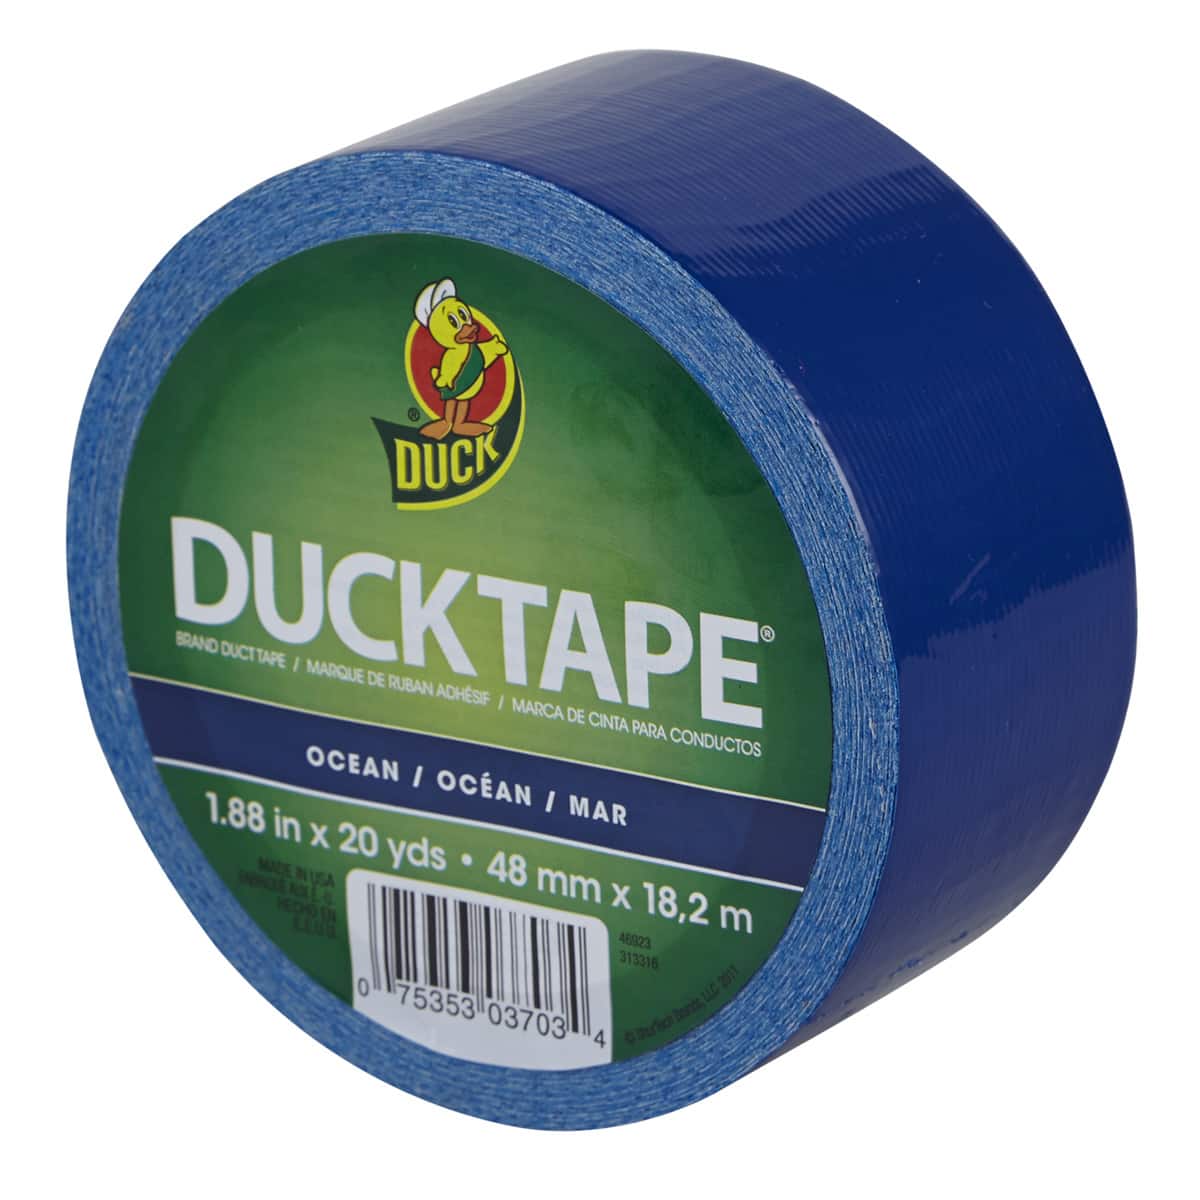 Duck 1304959 Colored Duct Tape, 1.88 x 20 yd. Size, Blue